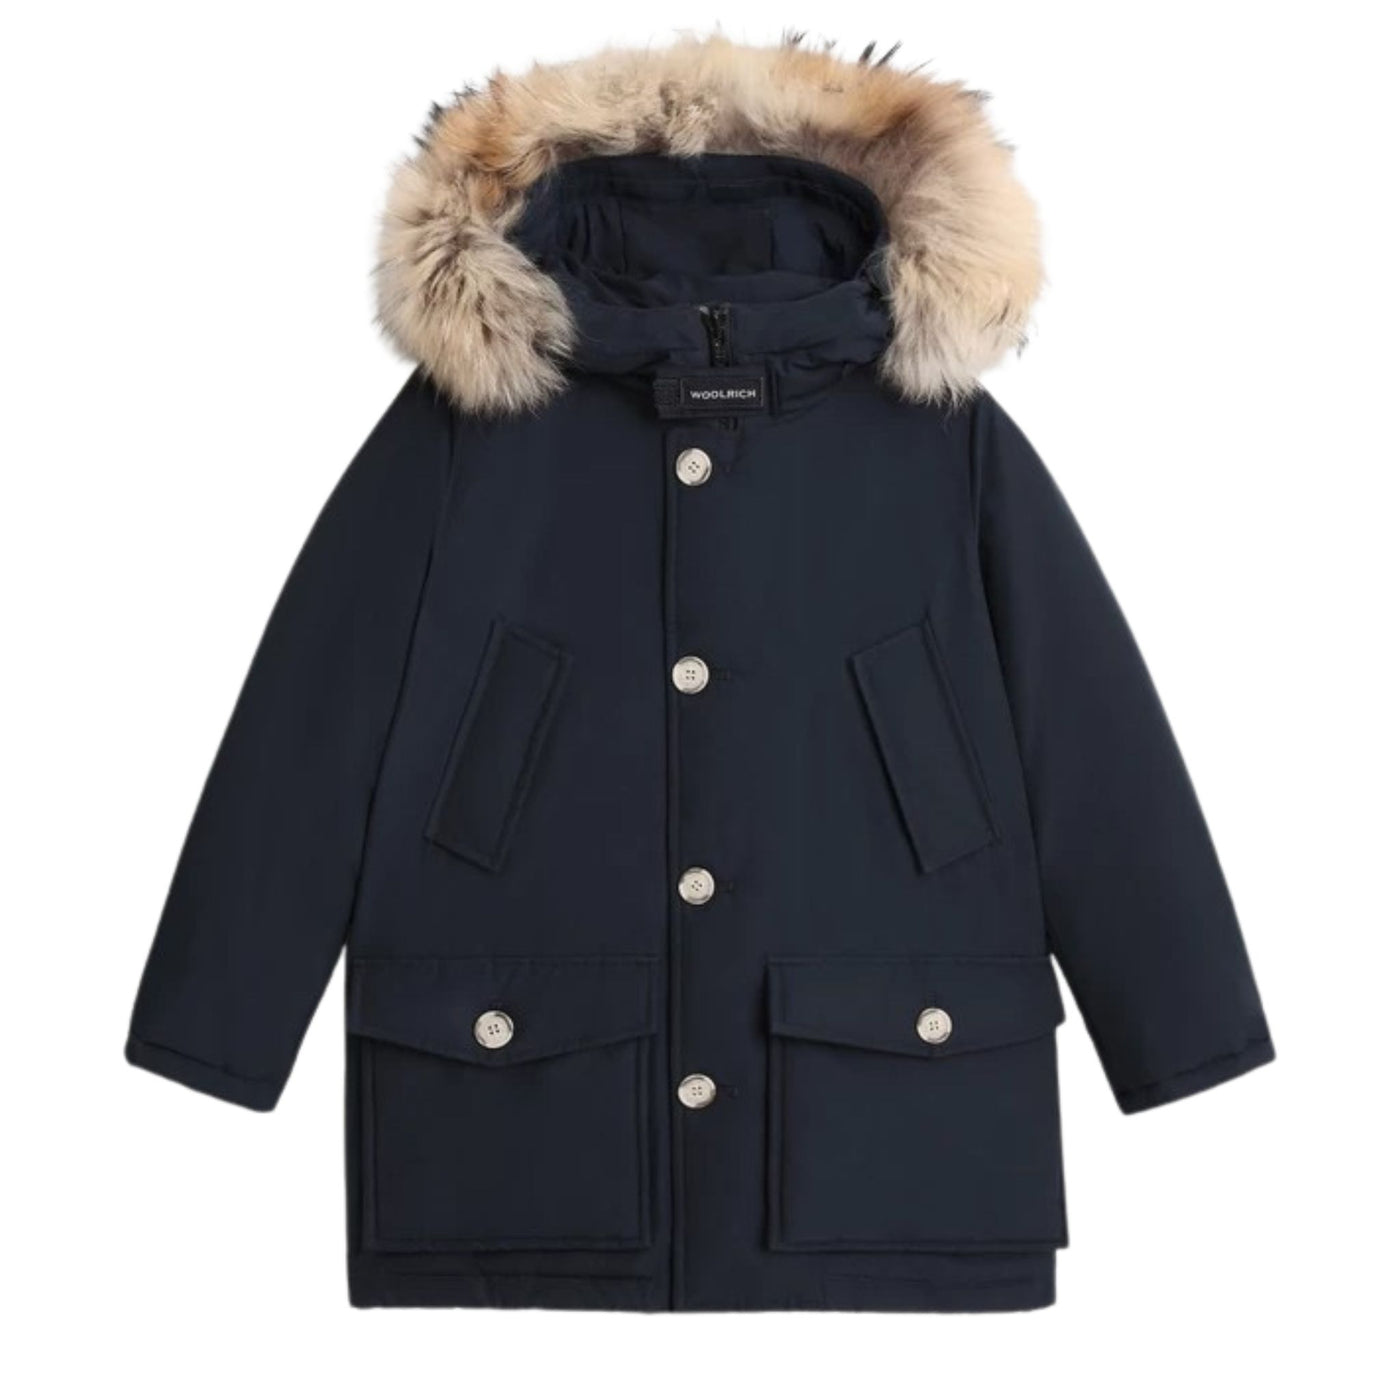 Children's jacket with removable fur